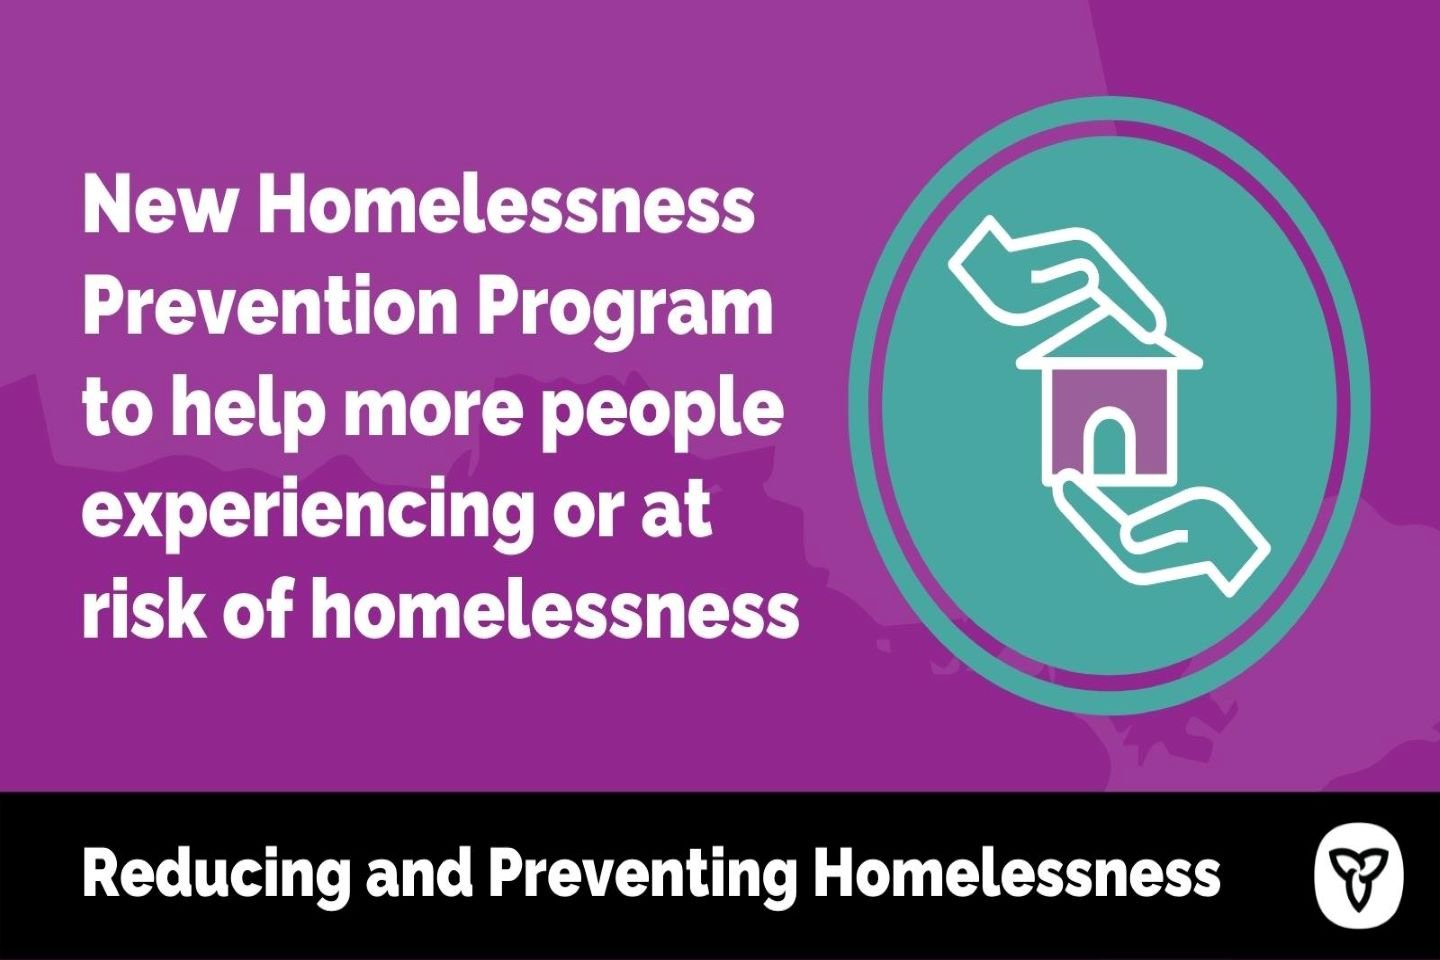 Investing in Additional Supports for People Experiencing Homelessness